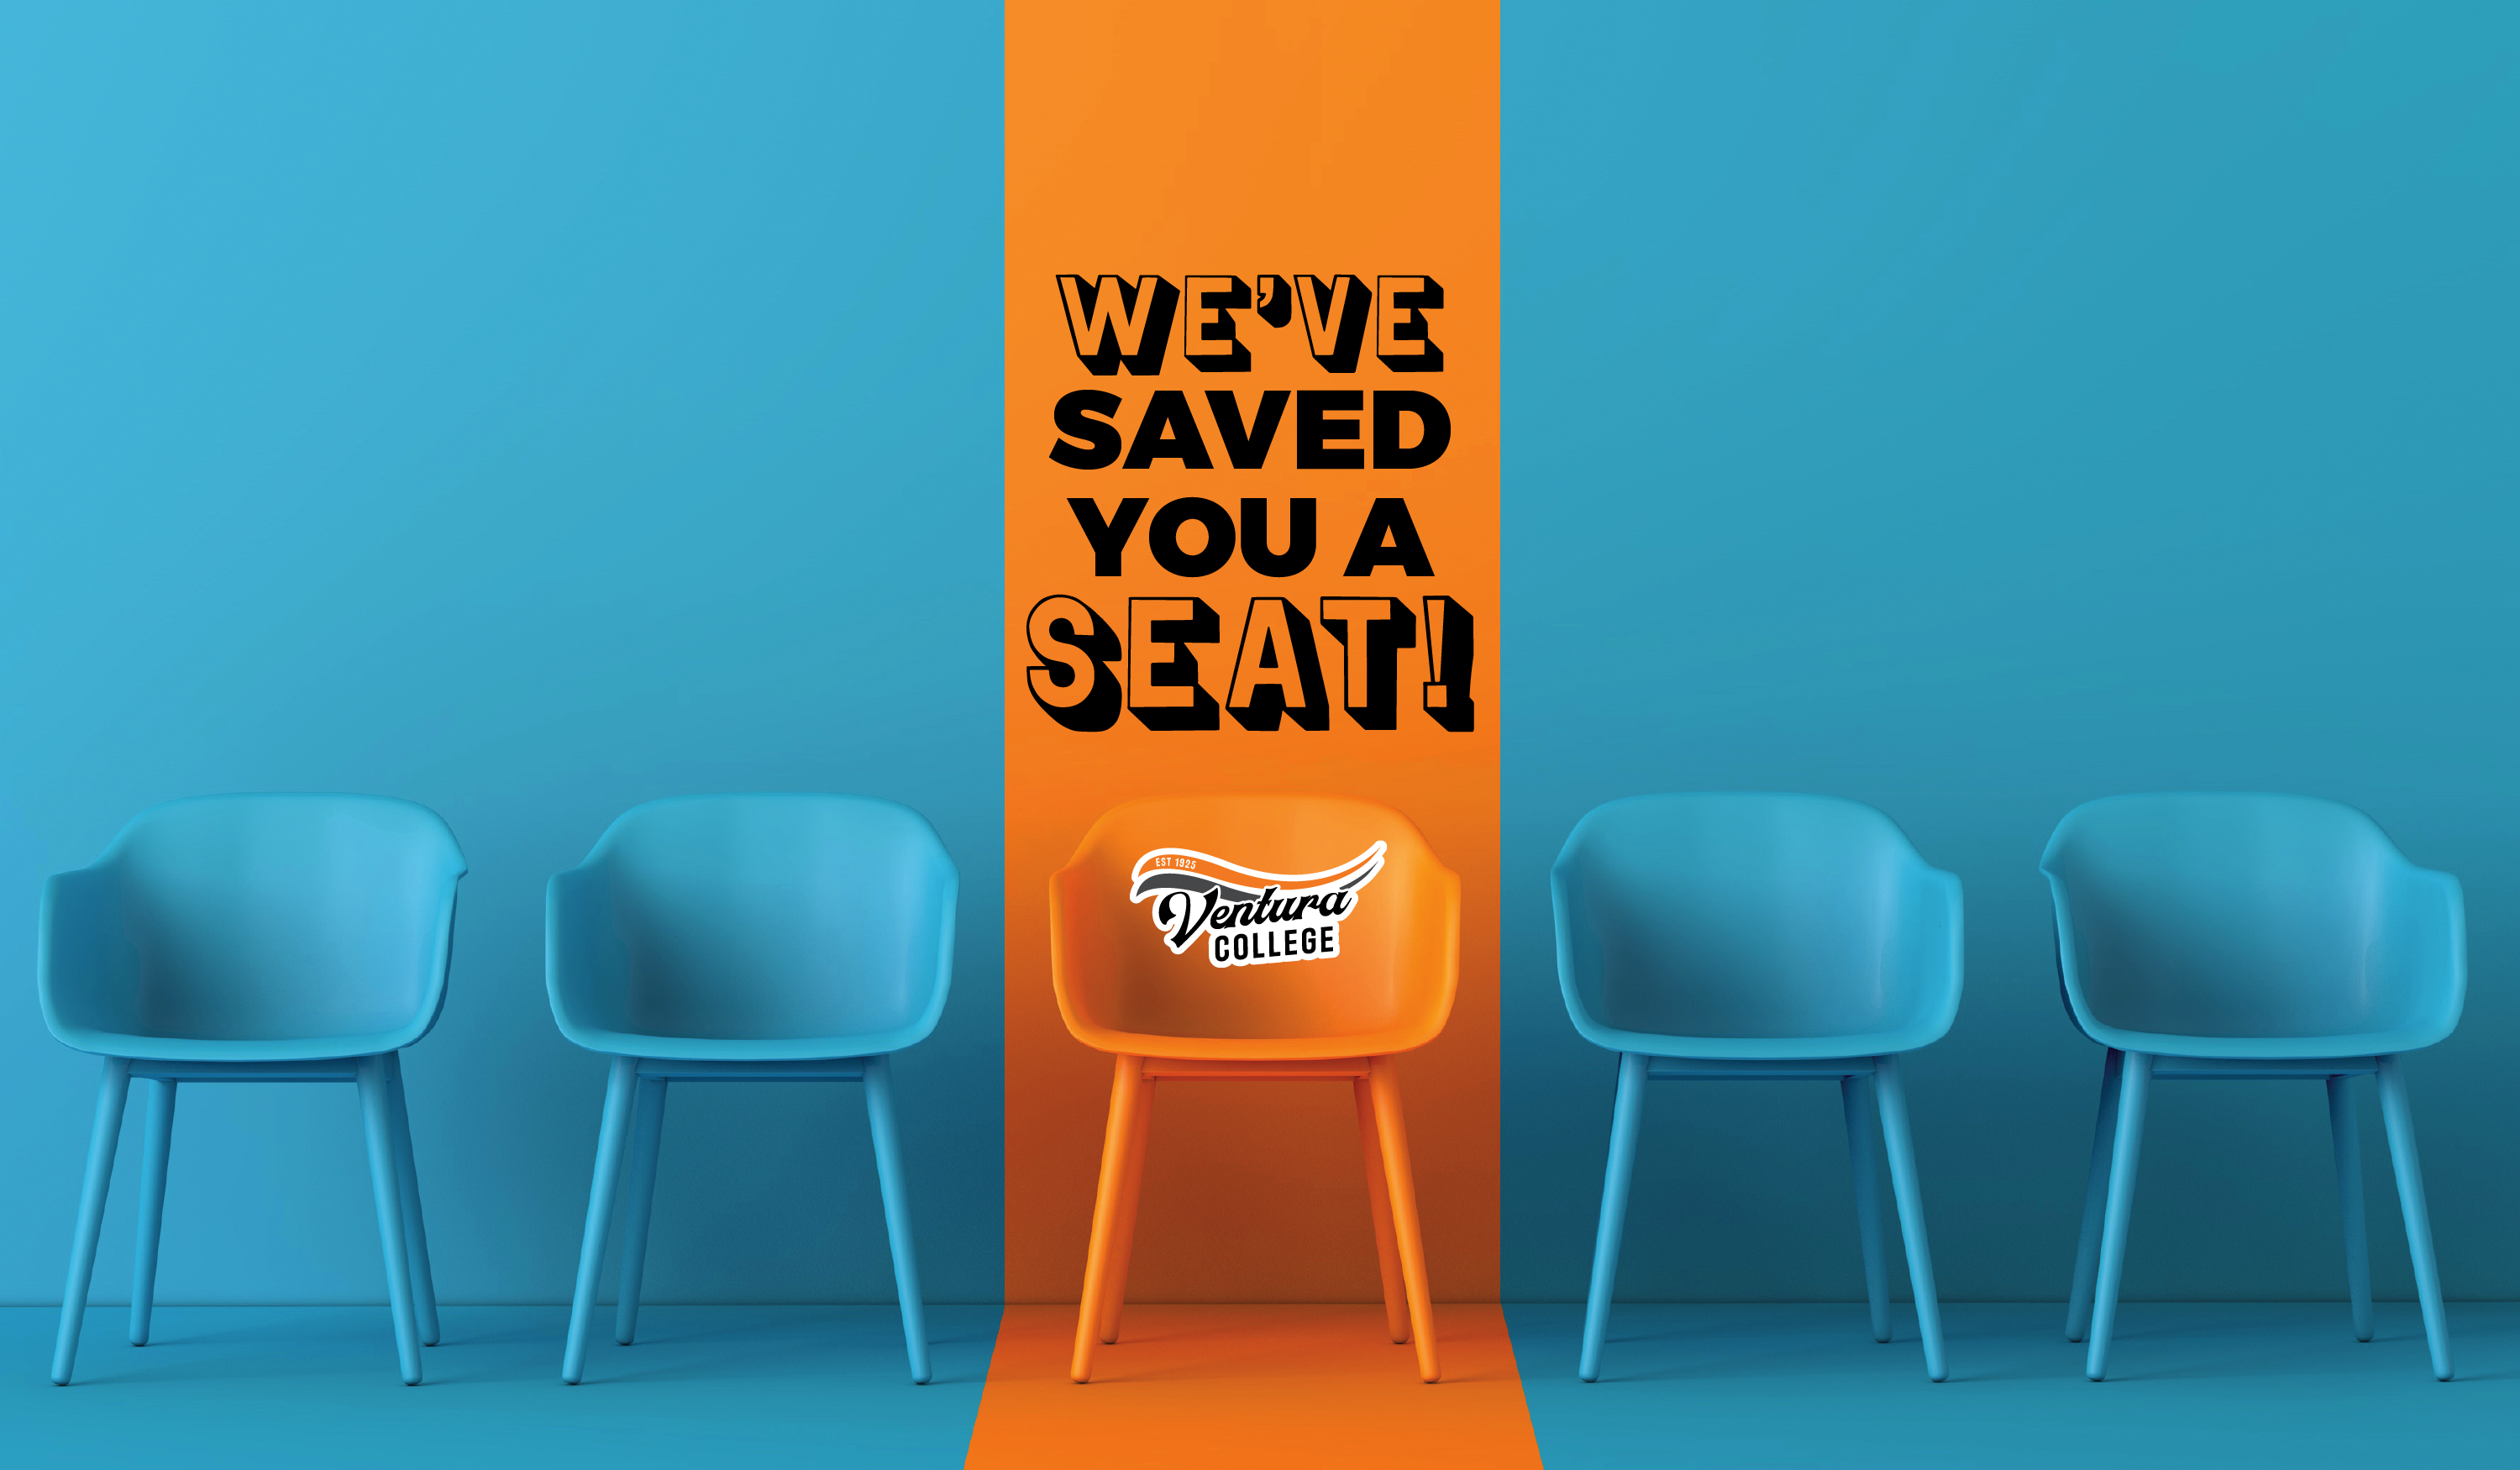 We've saved you a seat